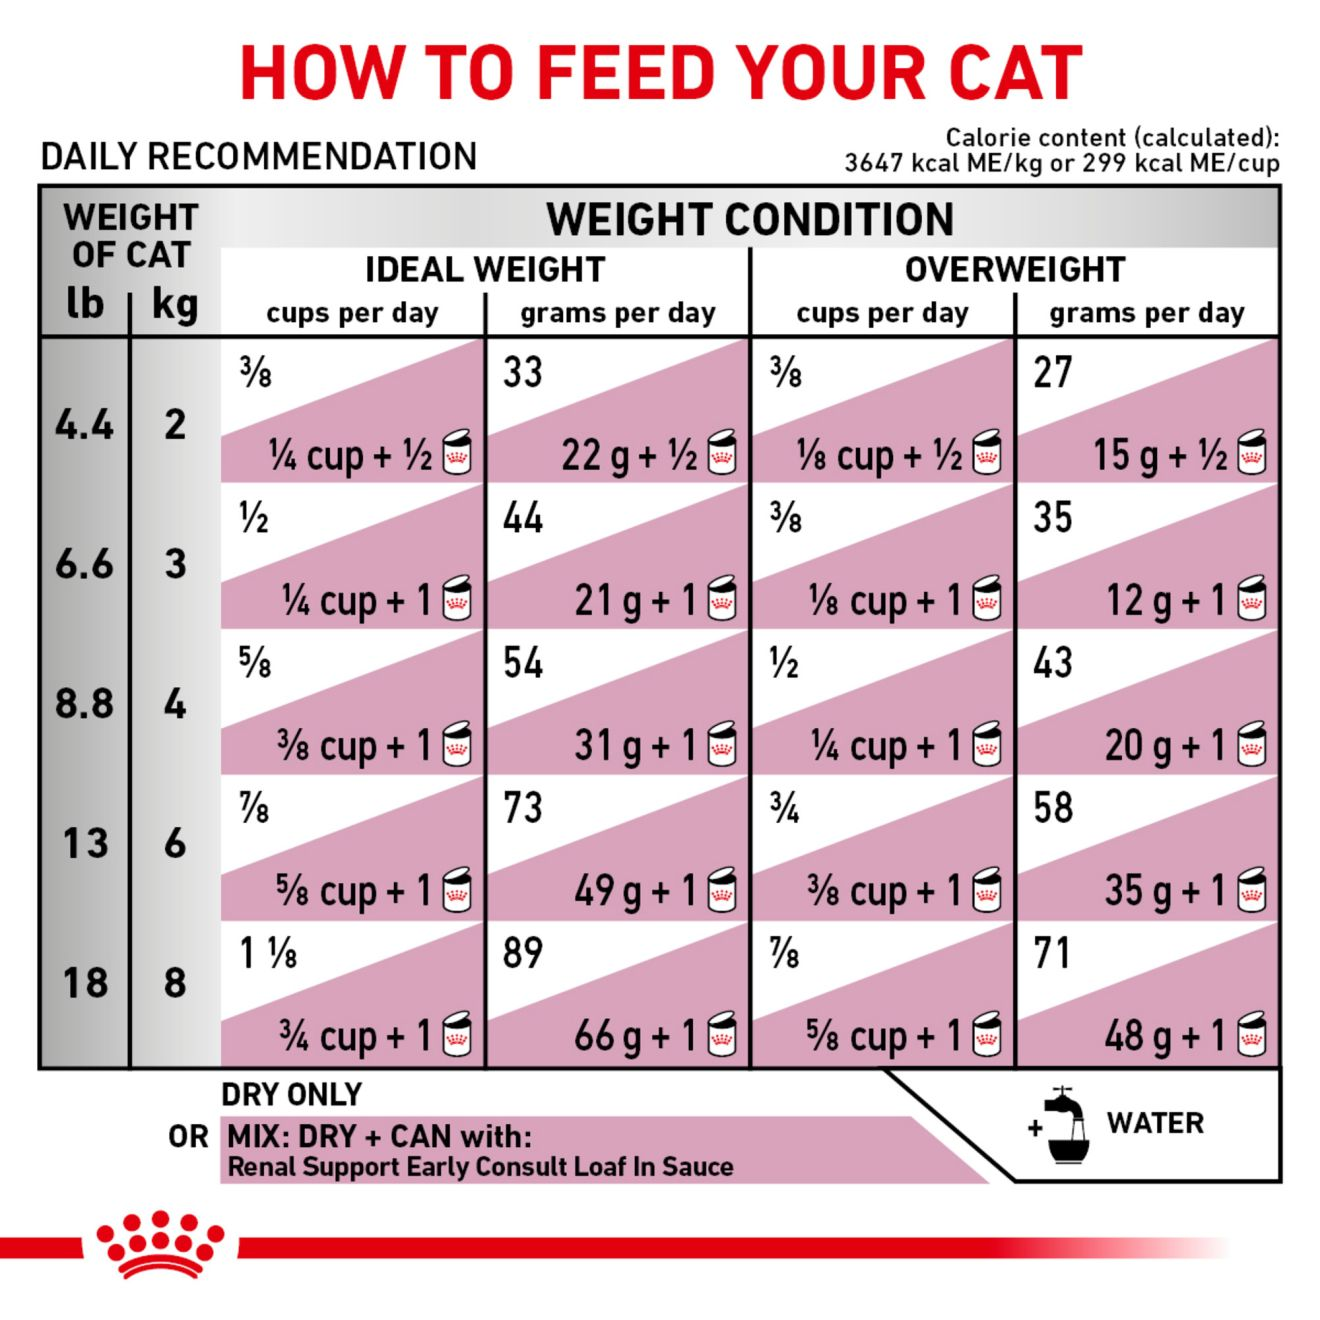 Feline Renal Support Early Consult